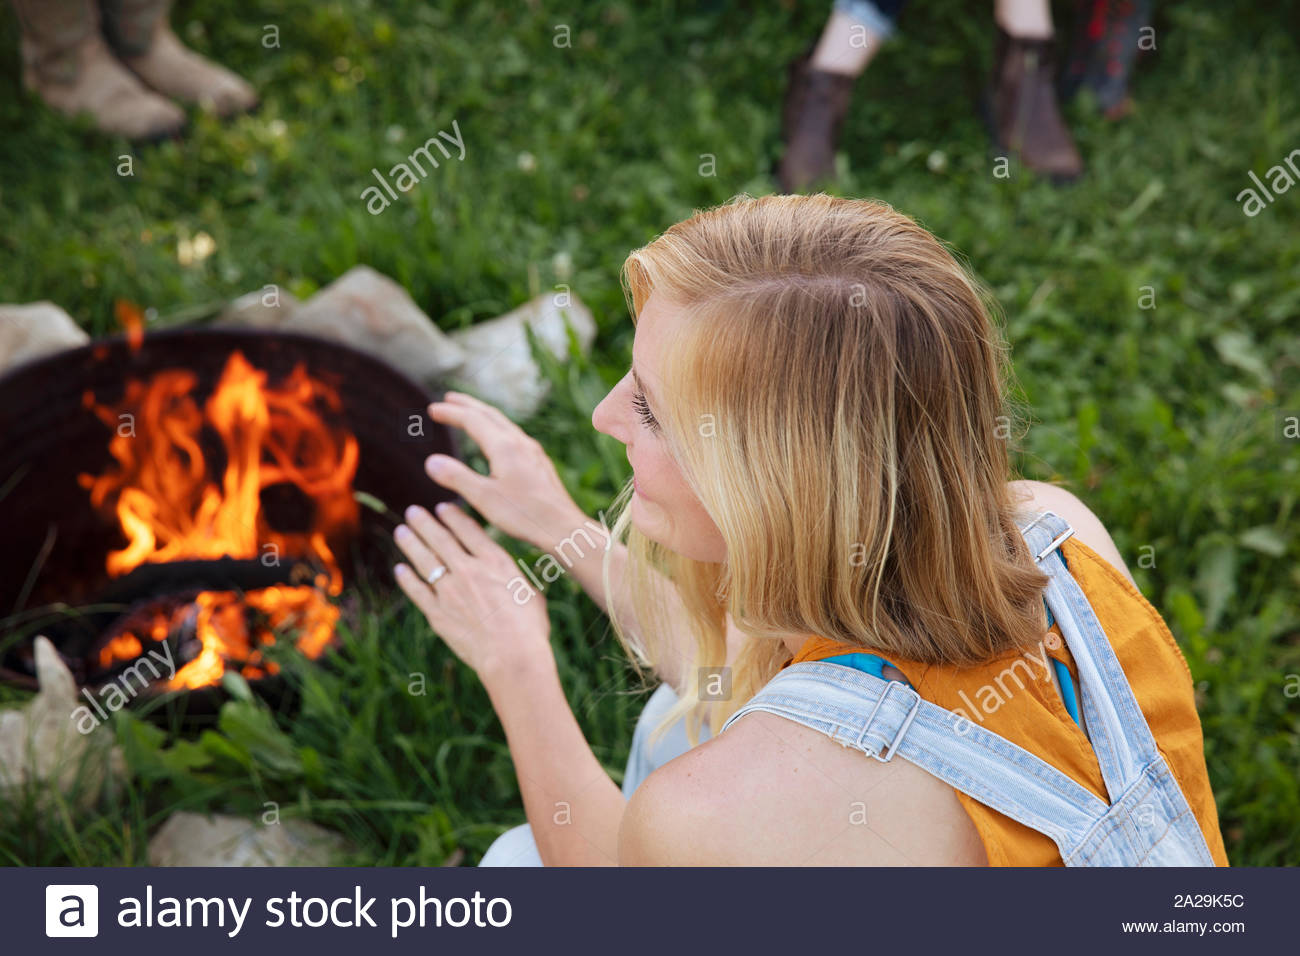 High angle of young woman warming hands by campfire Stock Photo